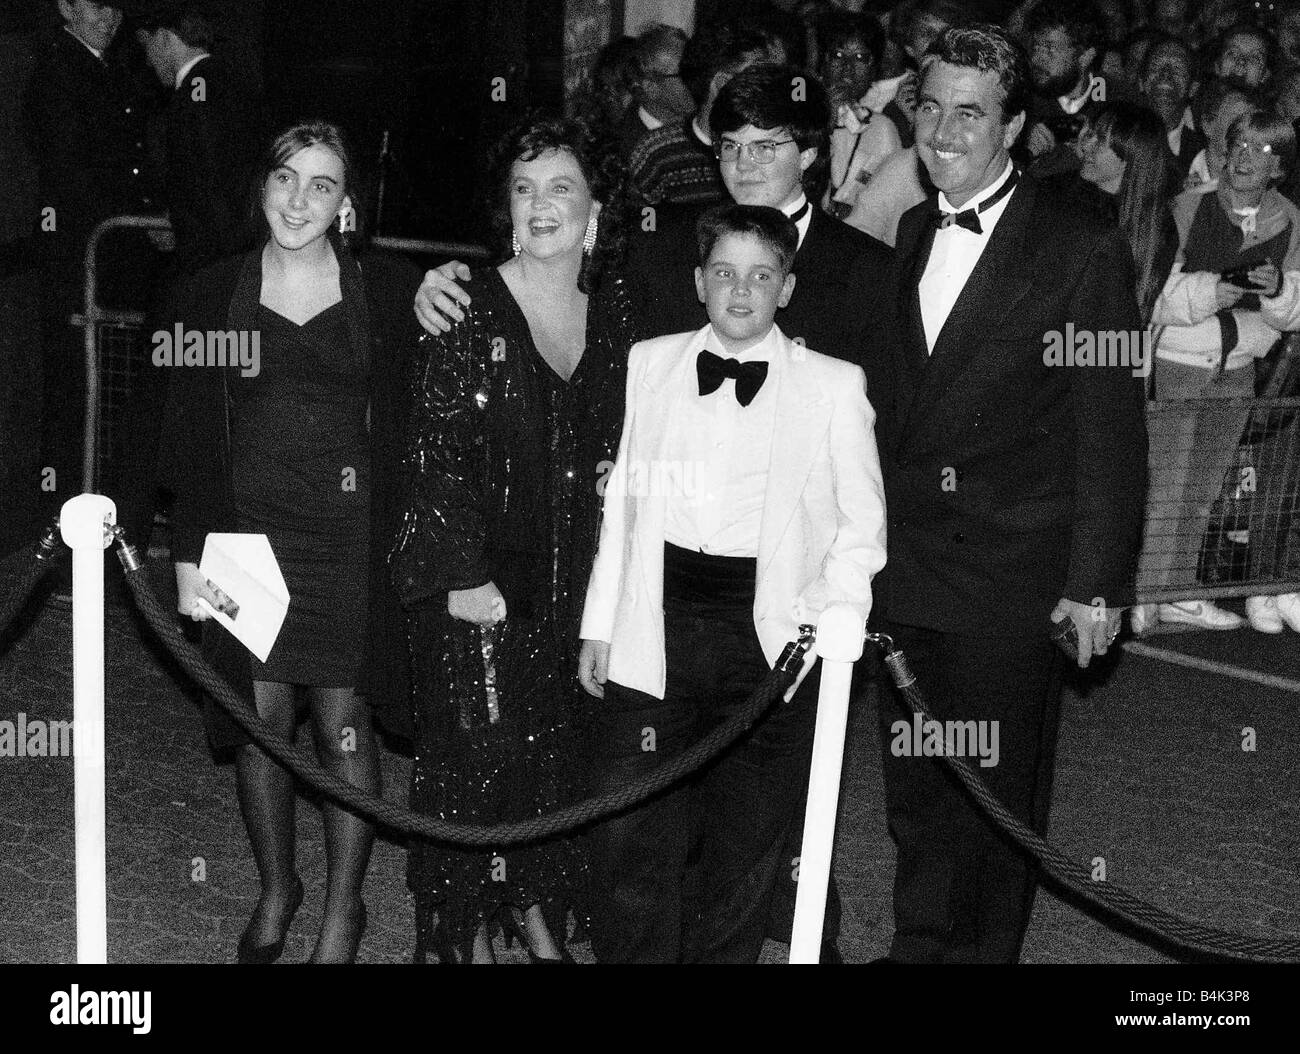 Pauline Collins with her actor husband John Alderton and family at a Film Premiere October 1989 Dbase Stock Photo